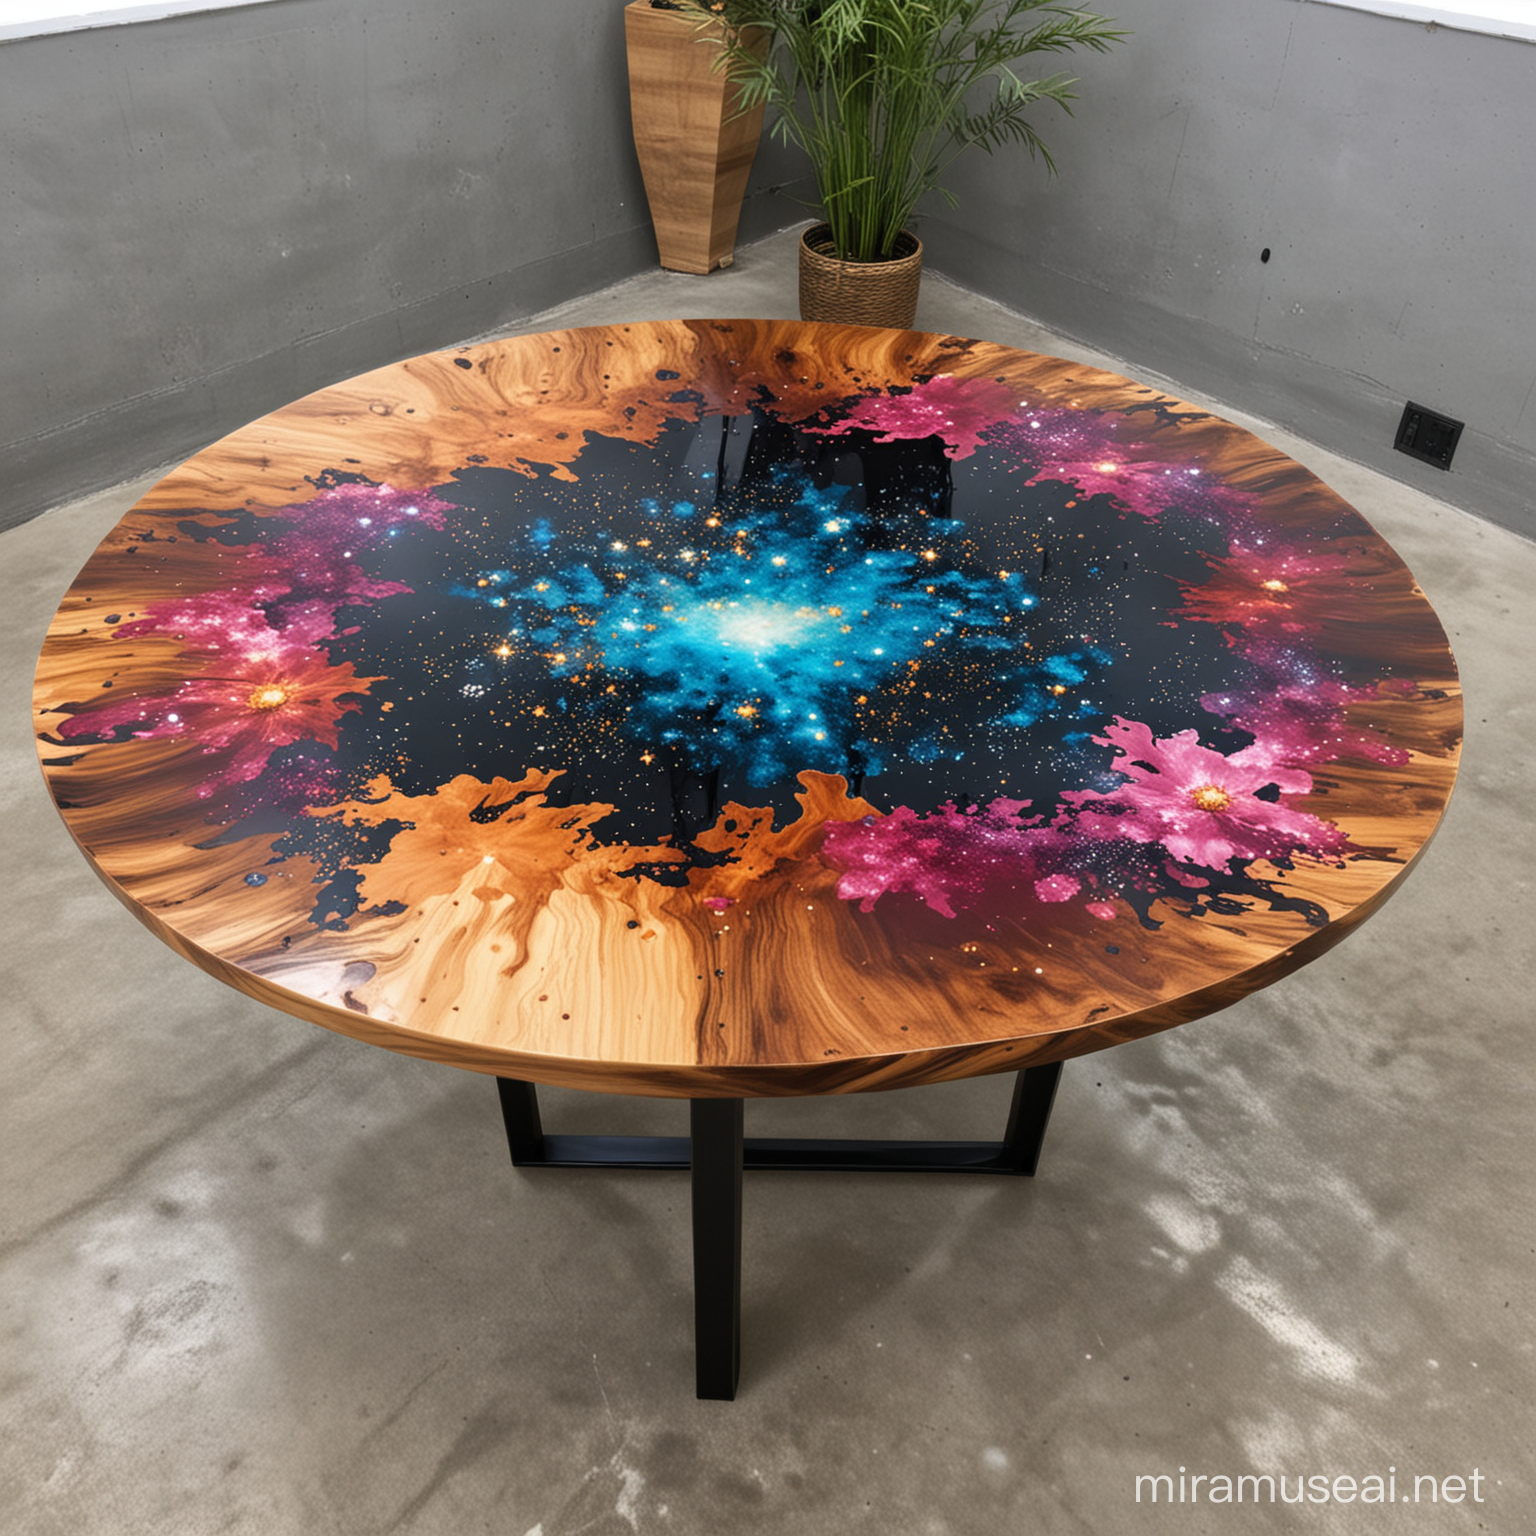 Starry Night Sky Resin Epoxy Table Captivating Cosmos Inspired Furniture